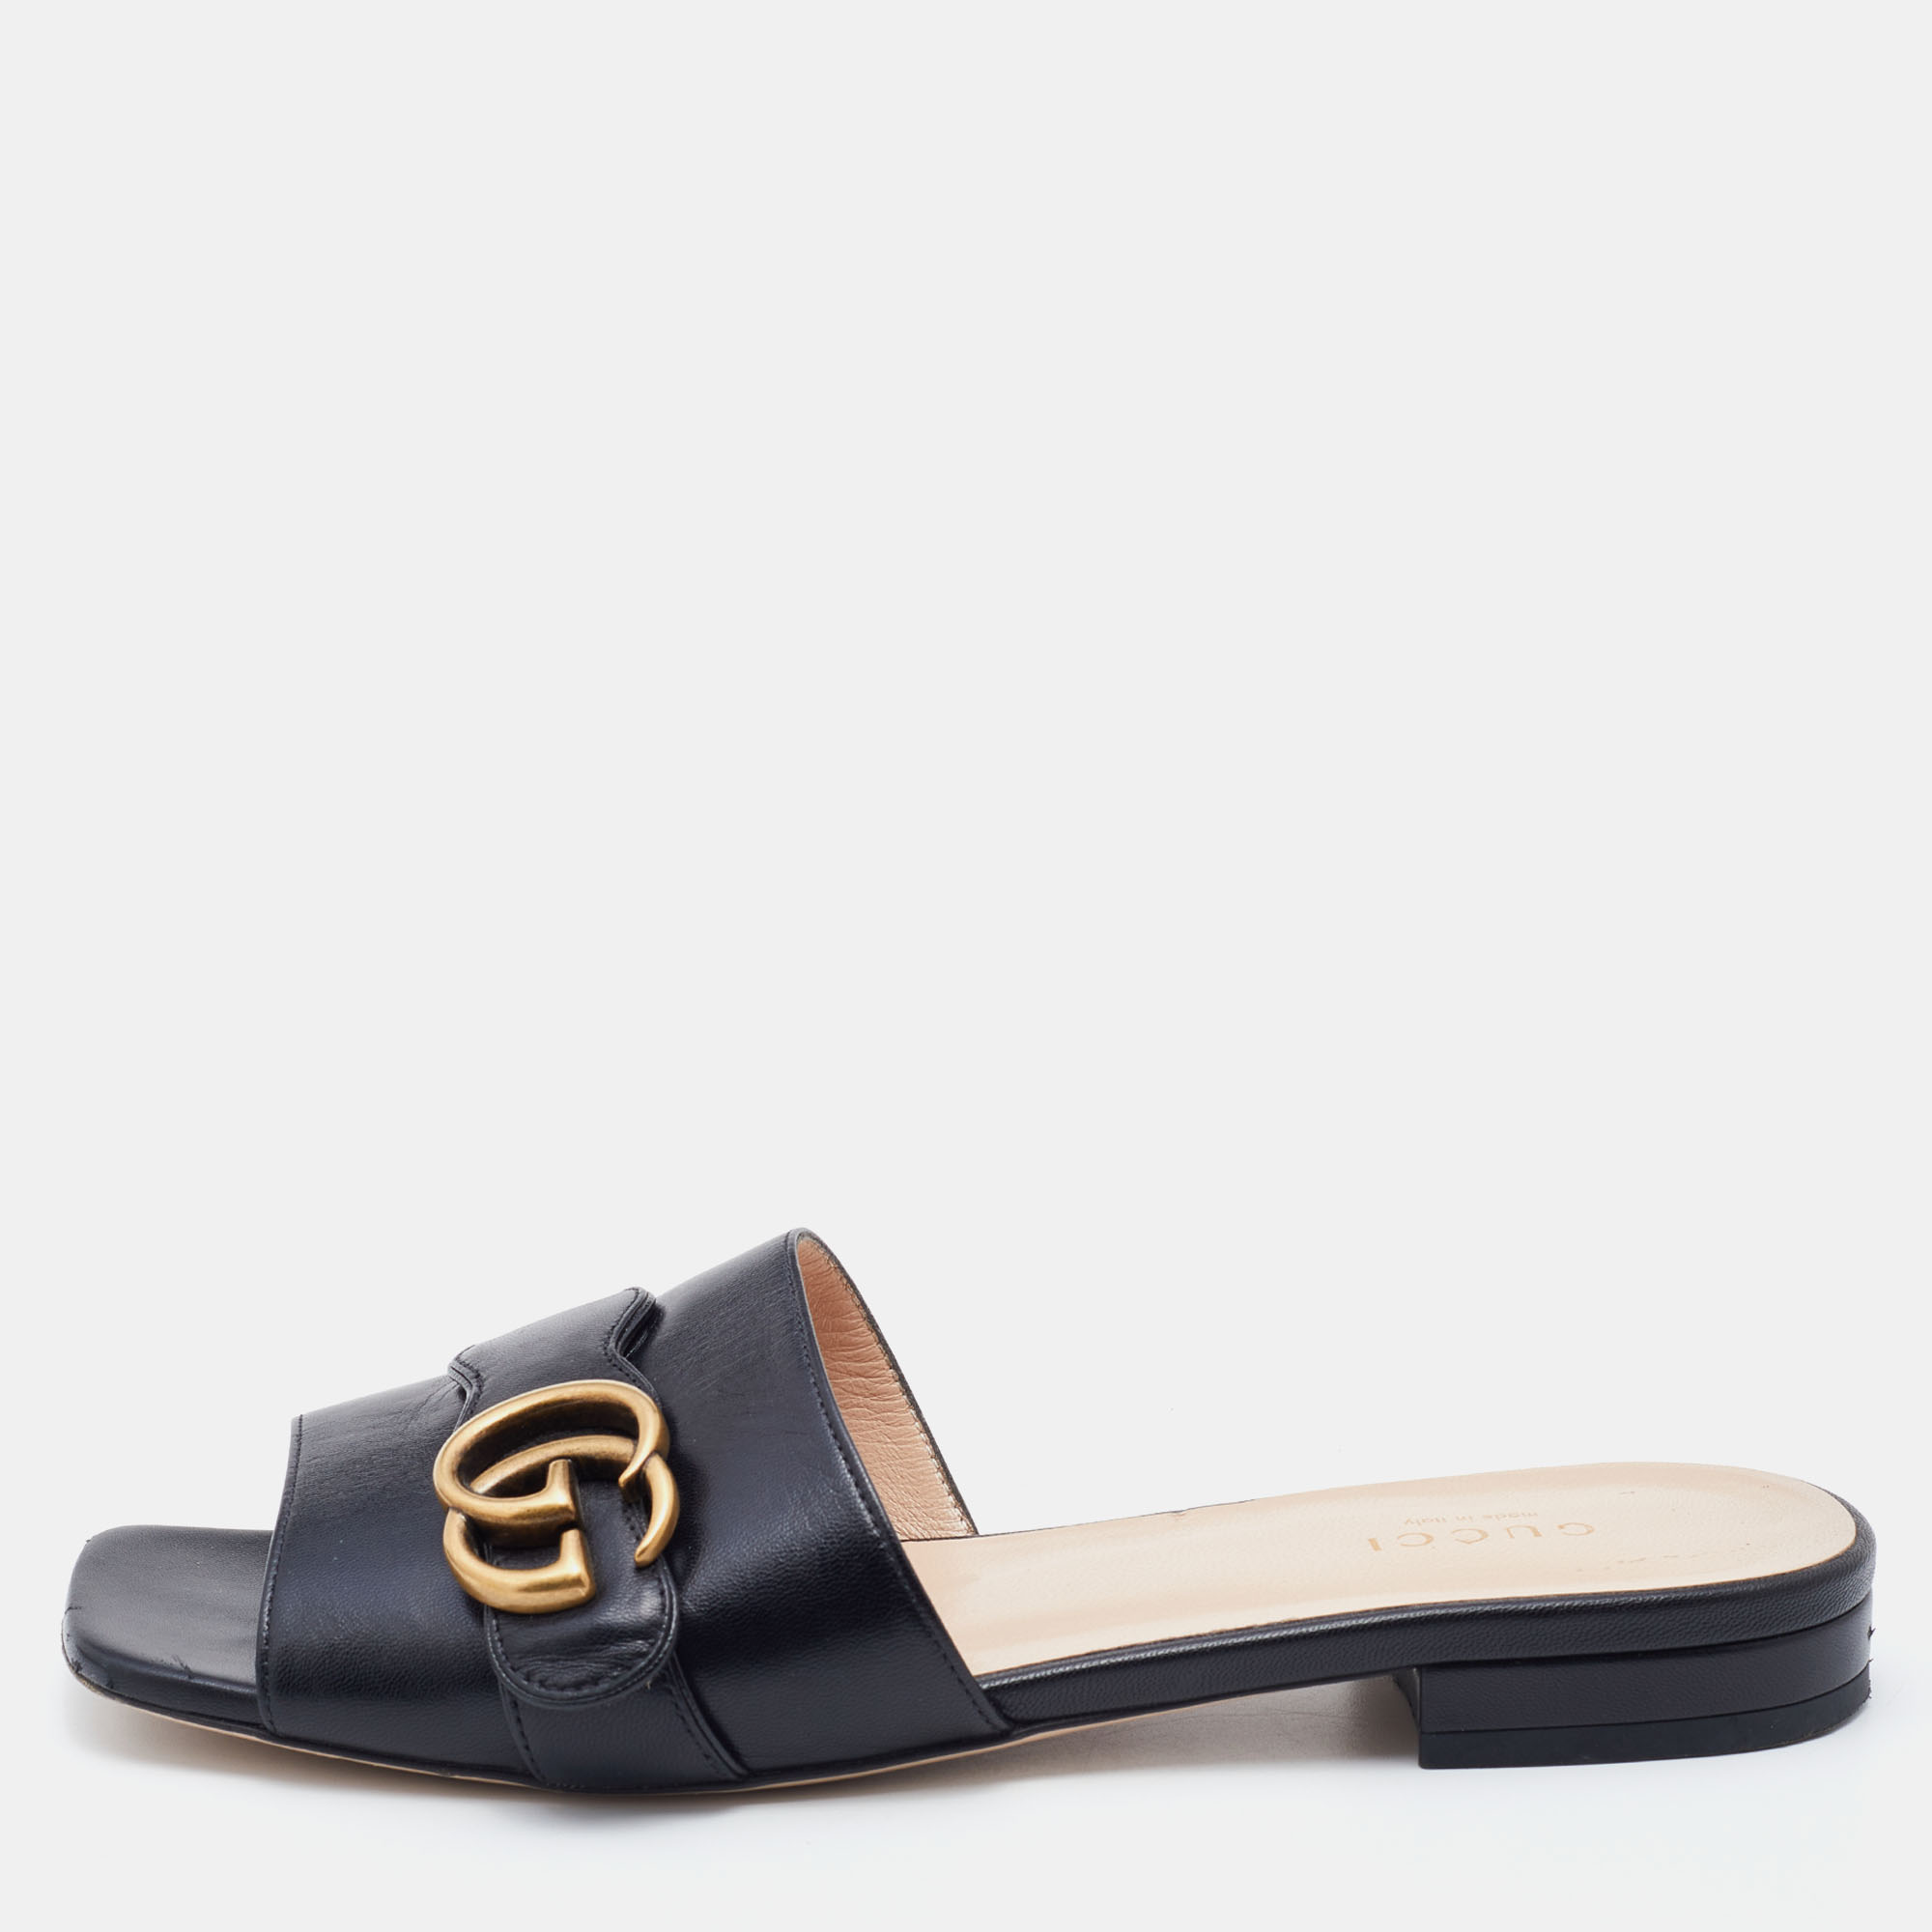 Pre-owned Gucci Black Leather Interlocking G Buckle Slide Sandals Size 37